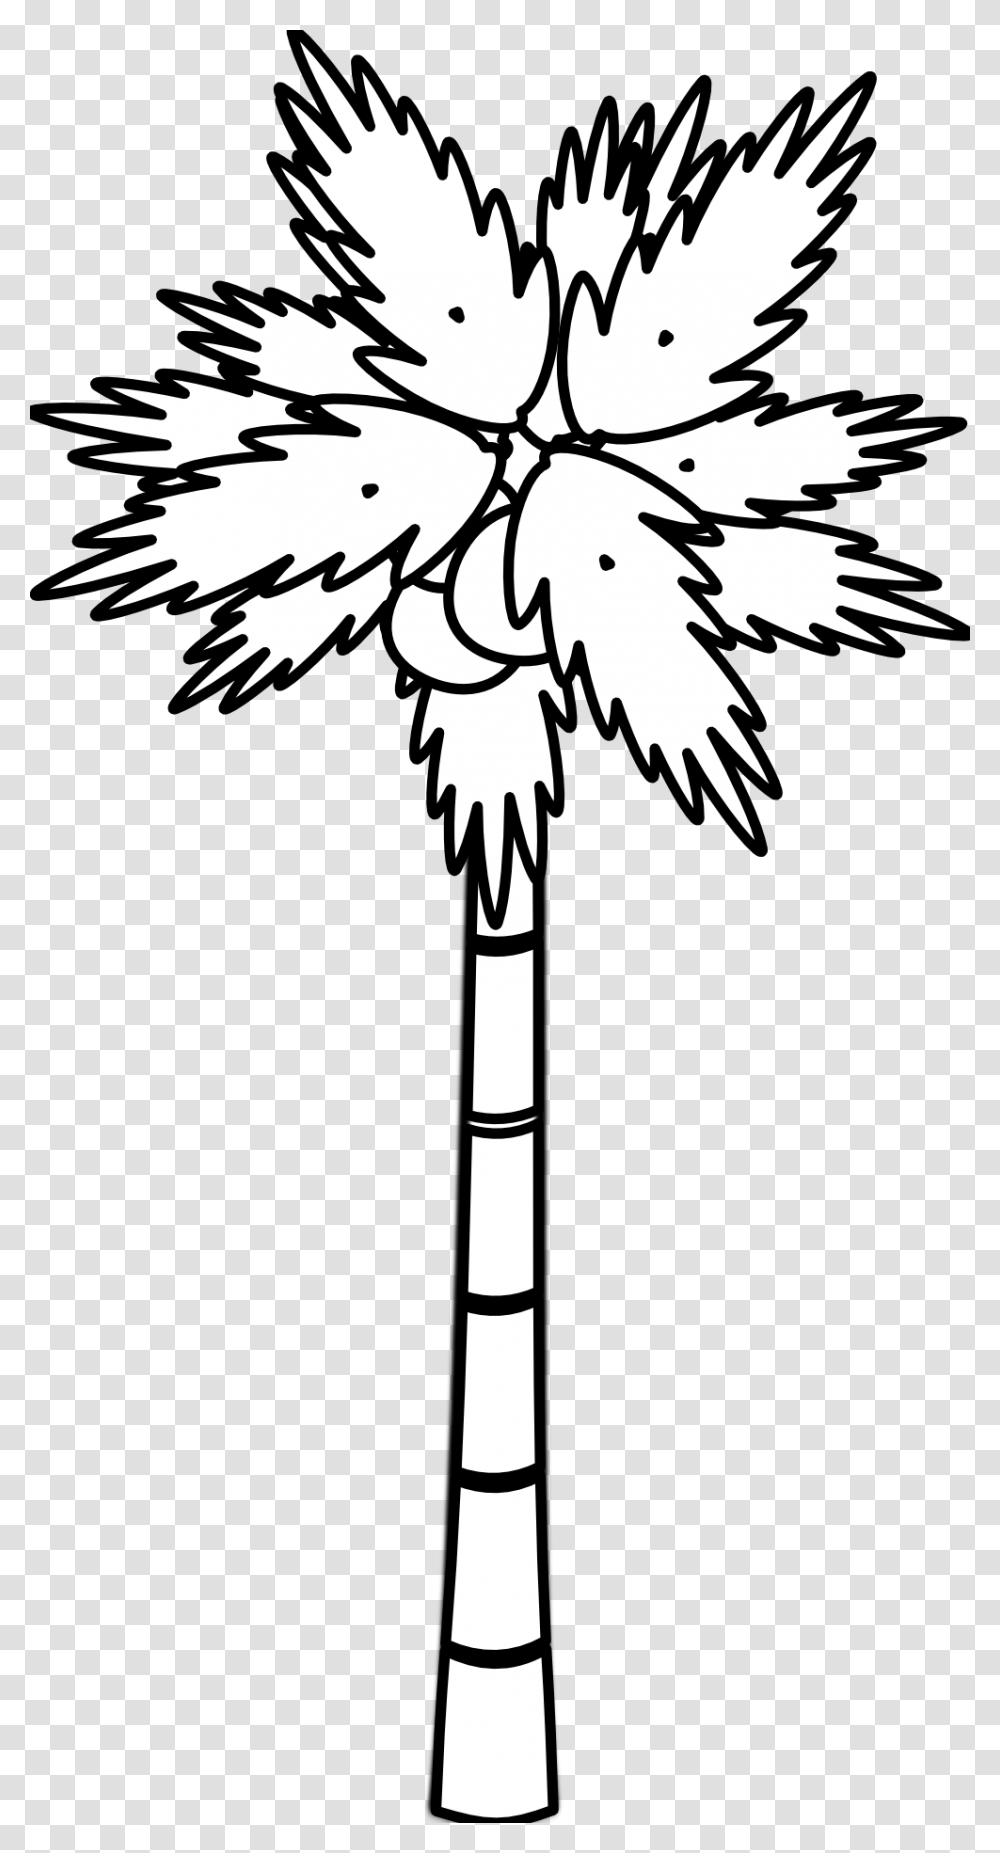 Clip Art Jungle Tree Clipart Black And White Transparent Png